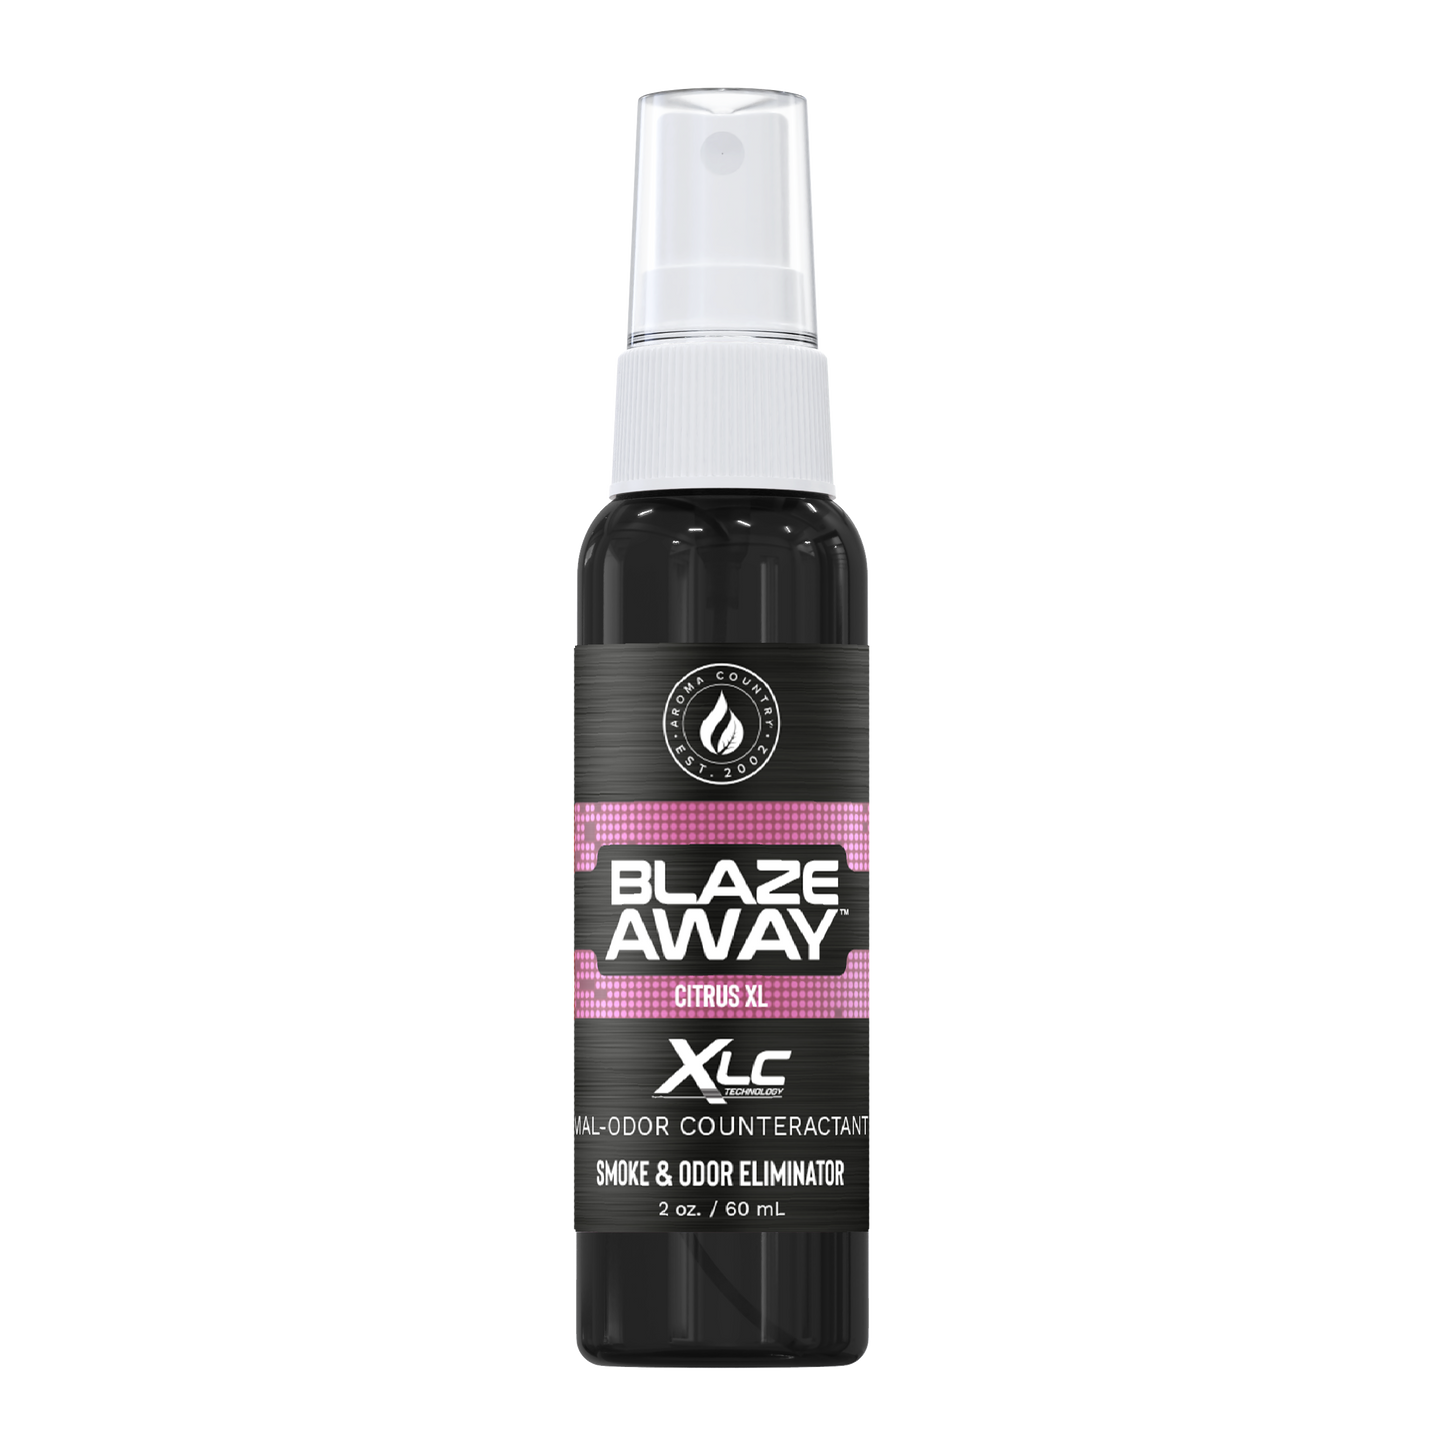 2 ounce bottle of Citrus XL Smoke and Odor Eliminator.